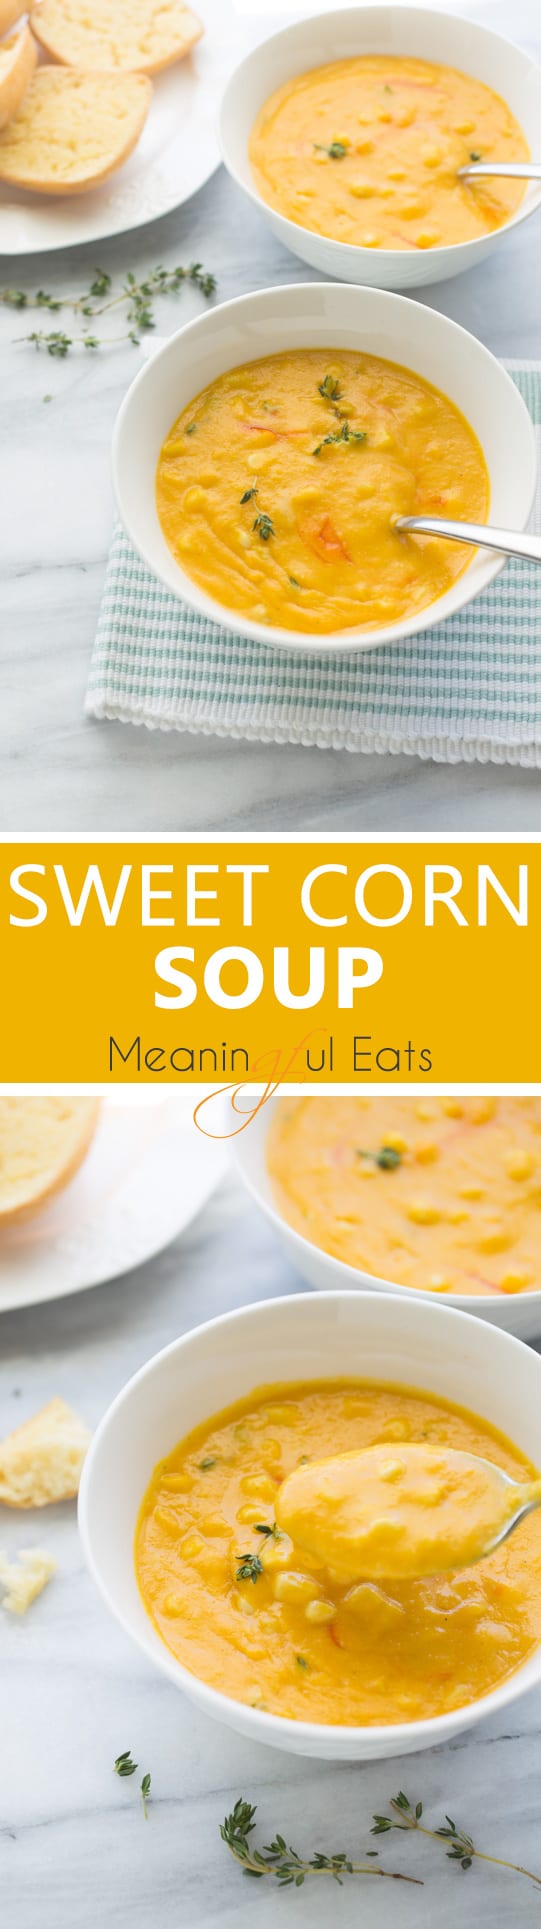 Sweet Corn Soup! An easy, healthy soup made with fresh ingredients. (Gluten-Free, Dairy-Free)